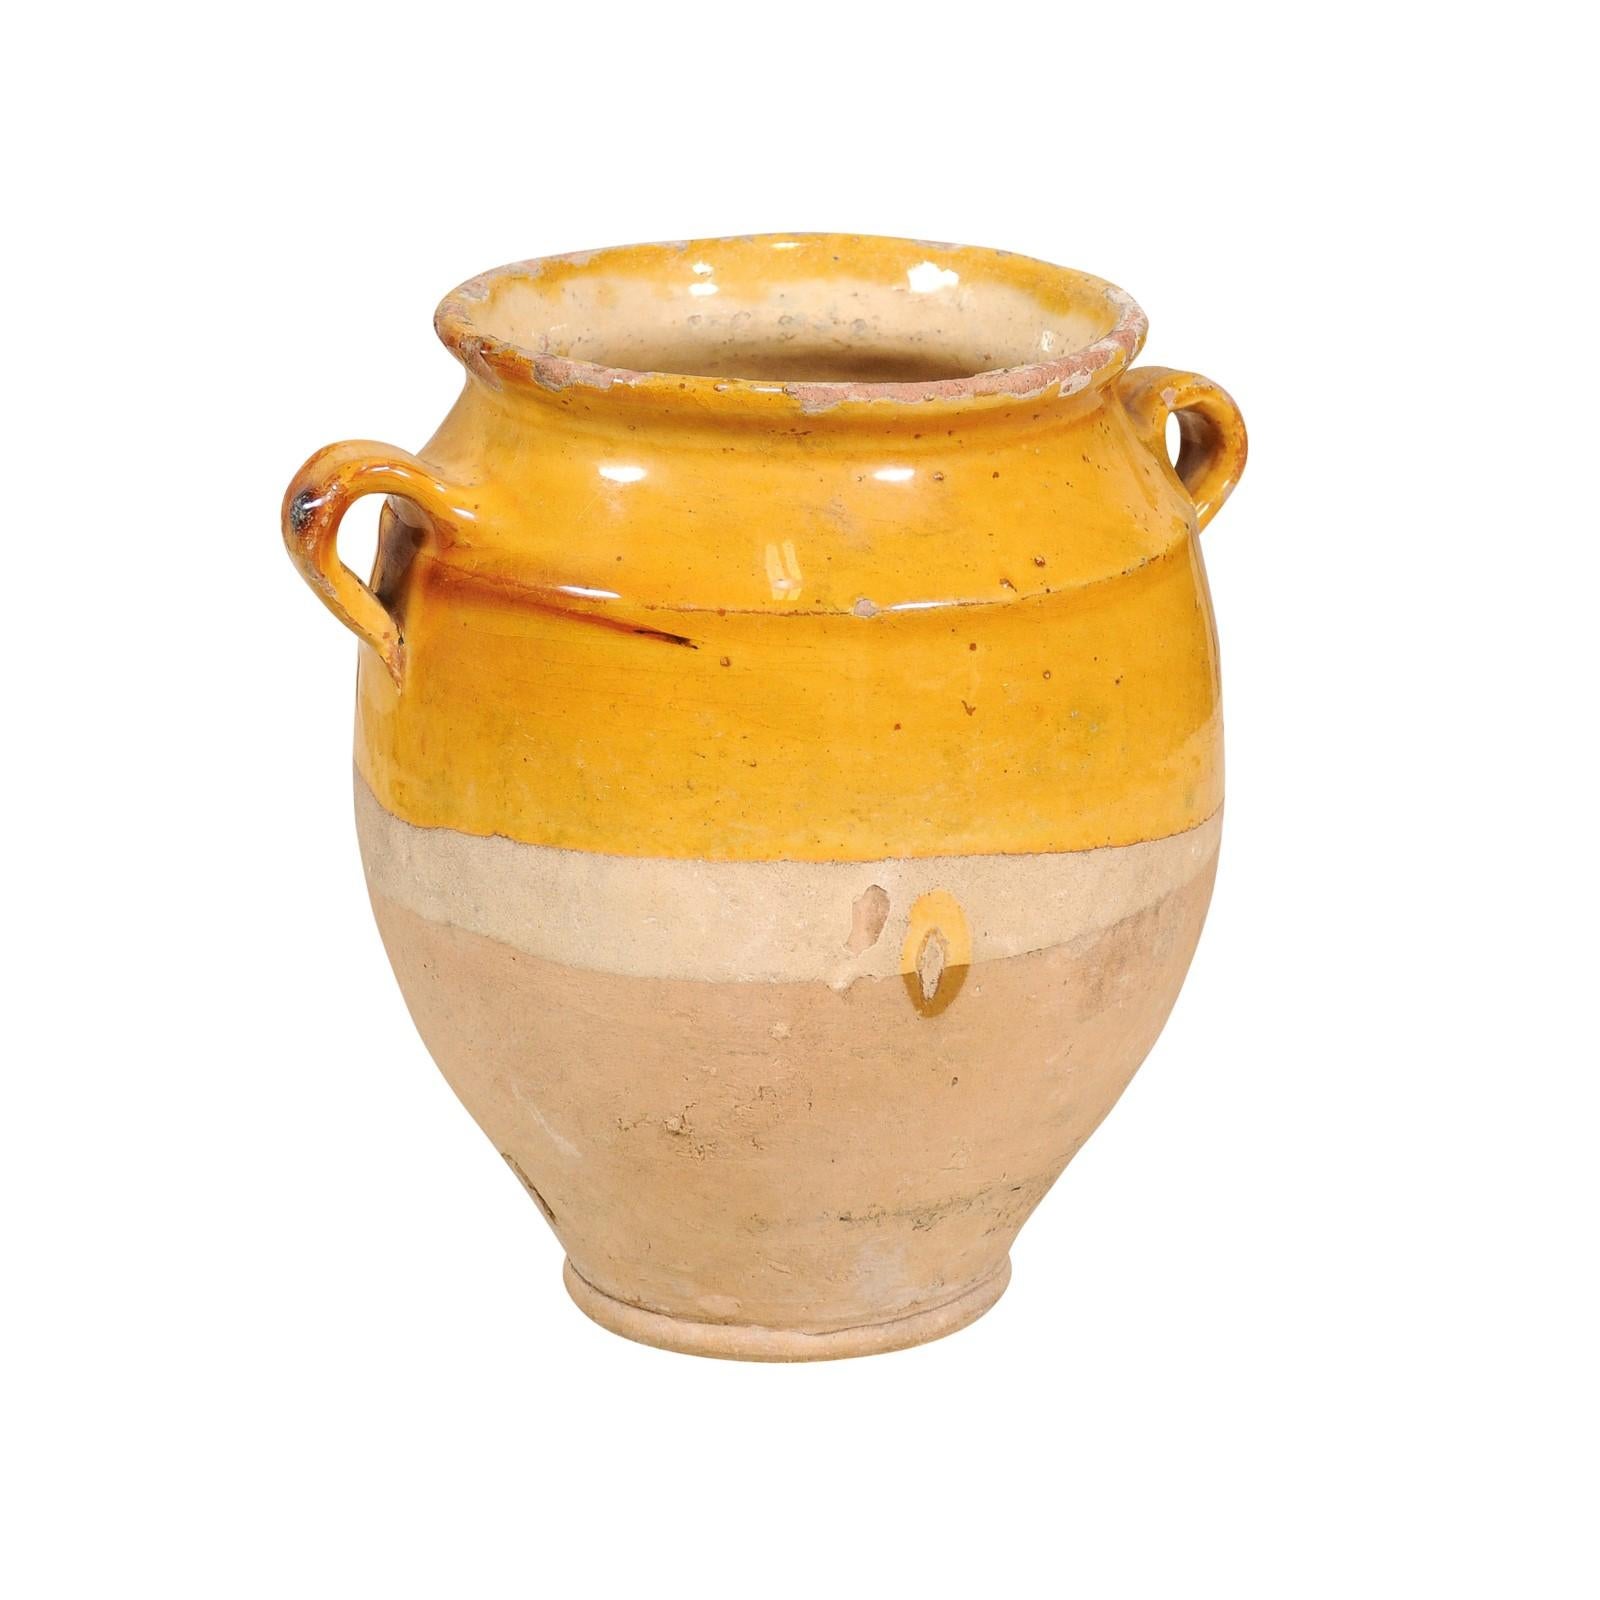 A French Provincial pottery pot à confit from the 19th century with yellow glaze, double handles and rustic character. This French Provincial pot à confit, hailing from the 19th century, is a splendid example of traditional pottery with its vibrant